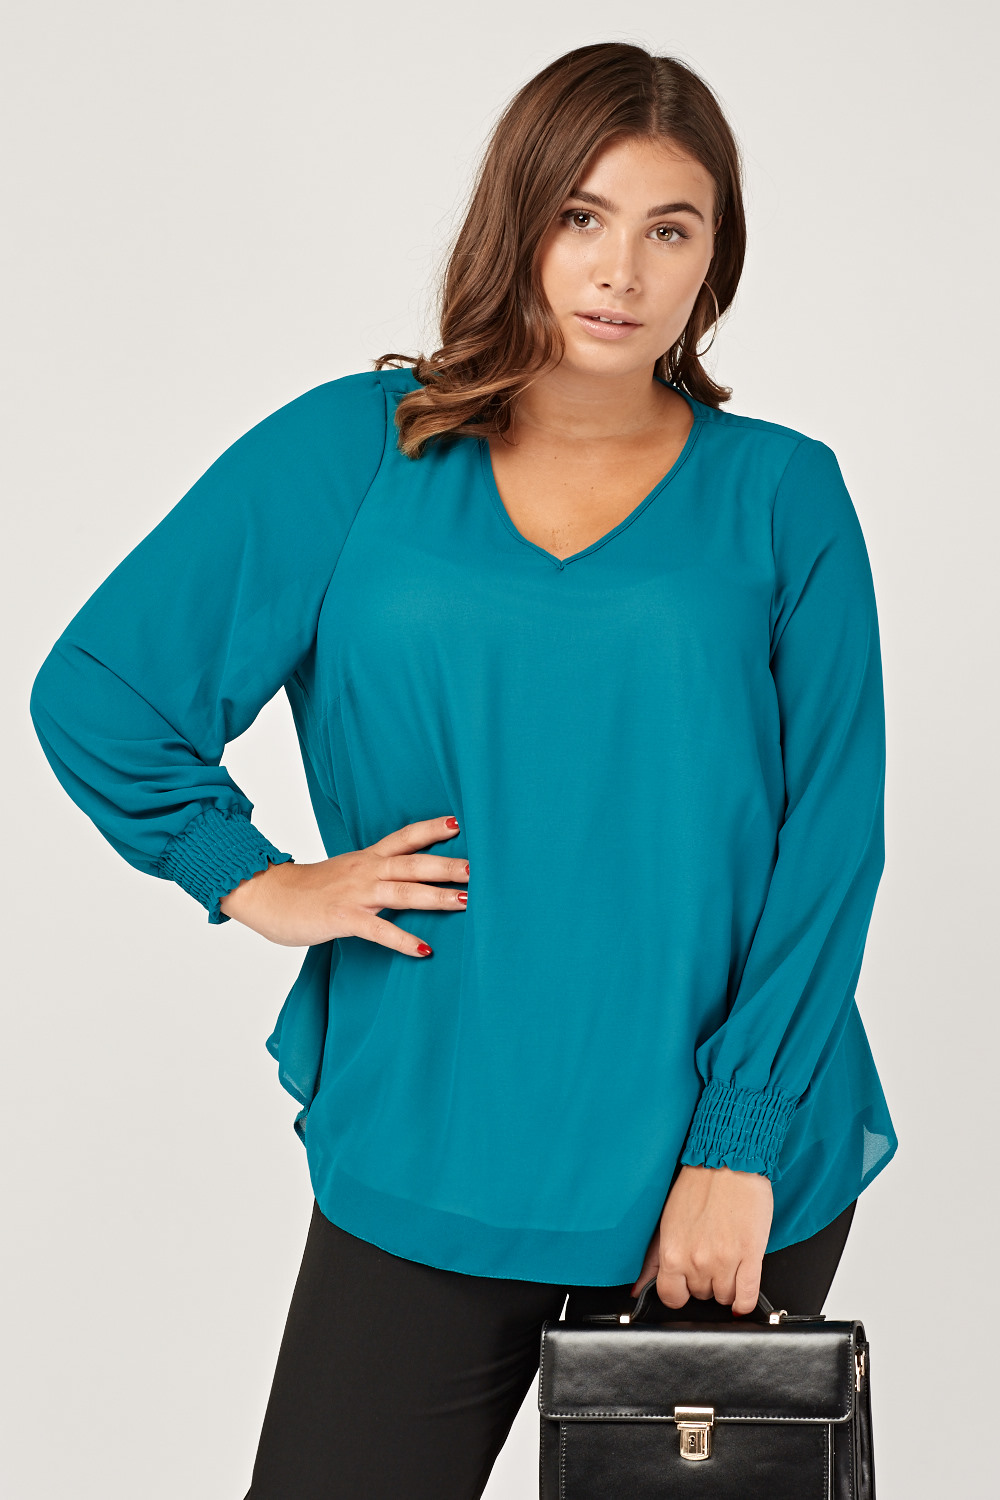 Sheer Turquoise Blouse - Just $7